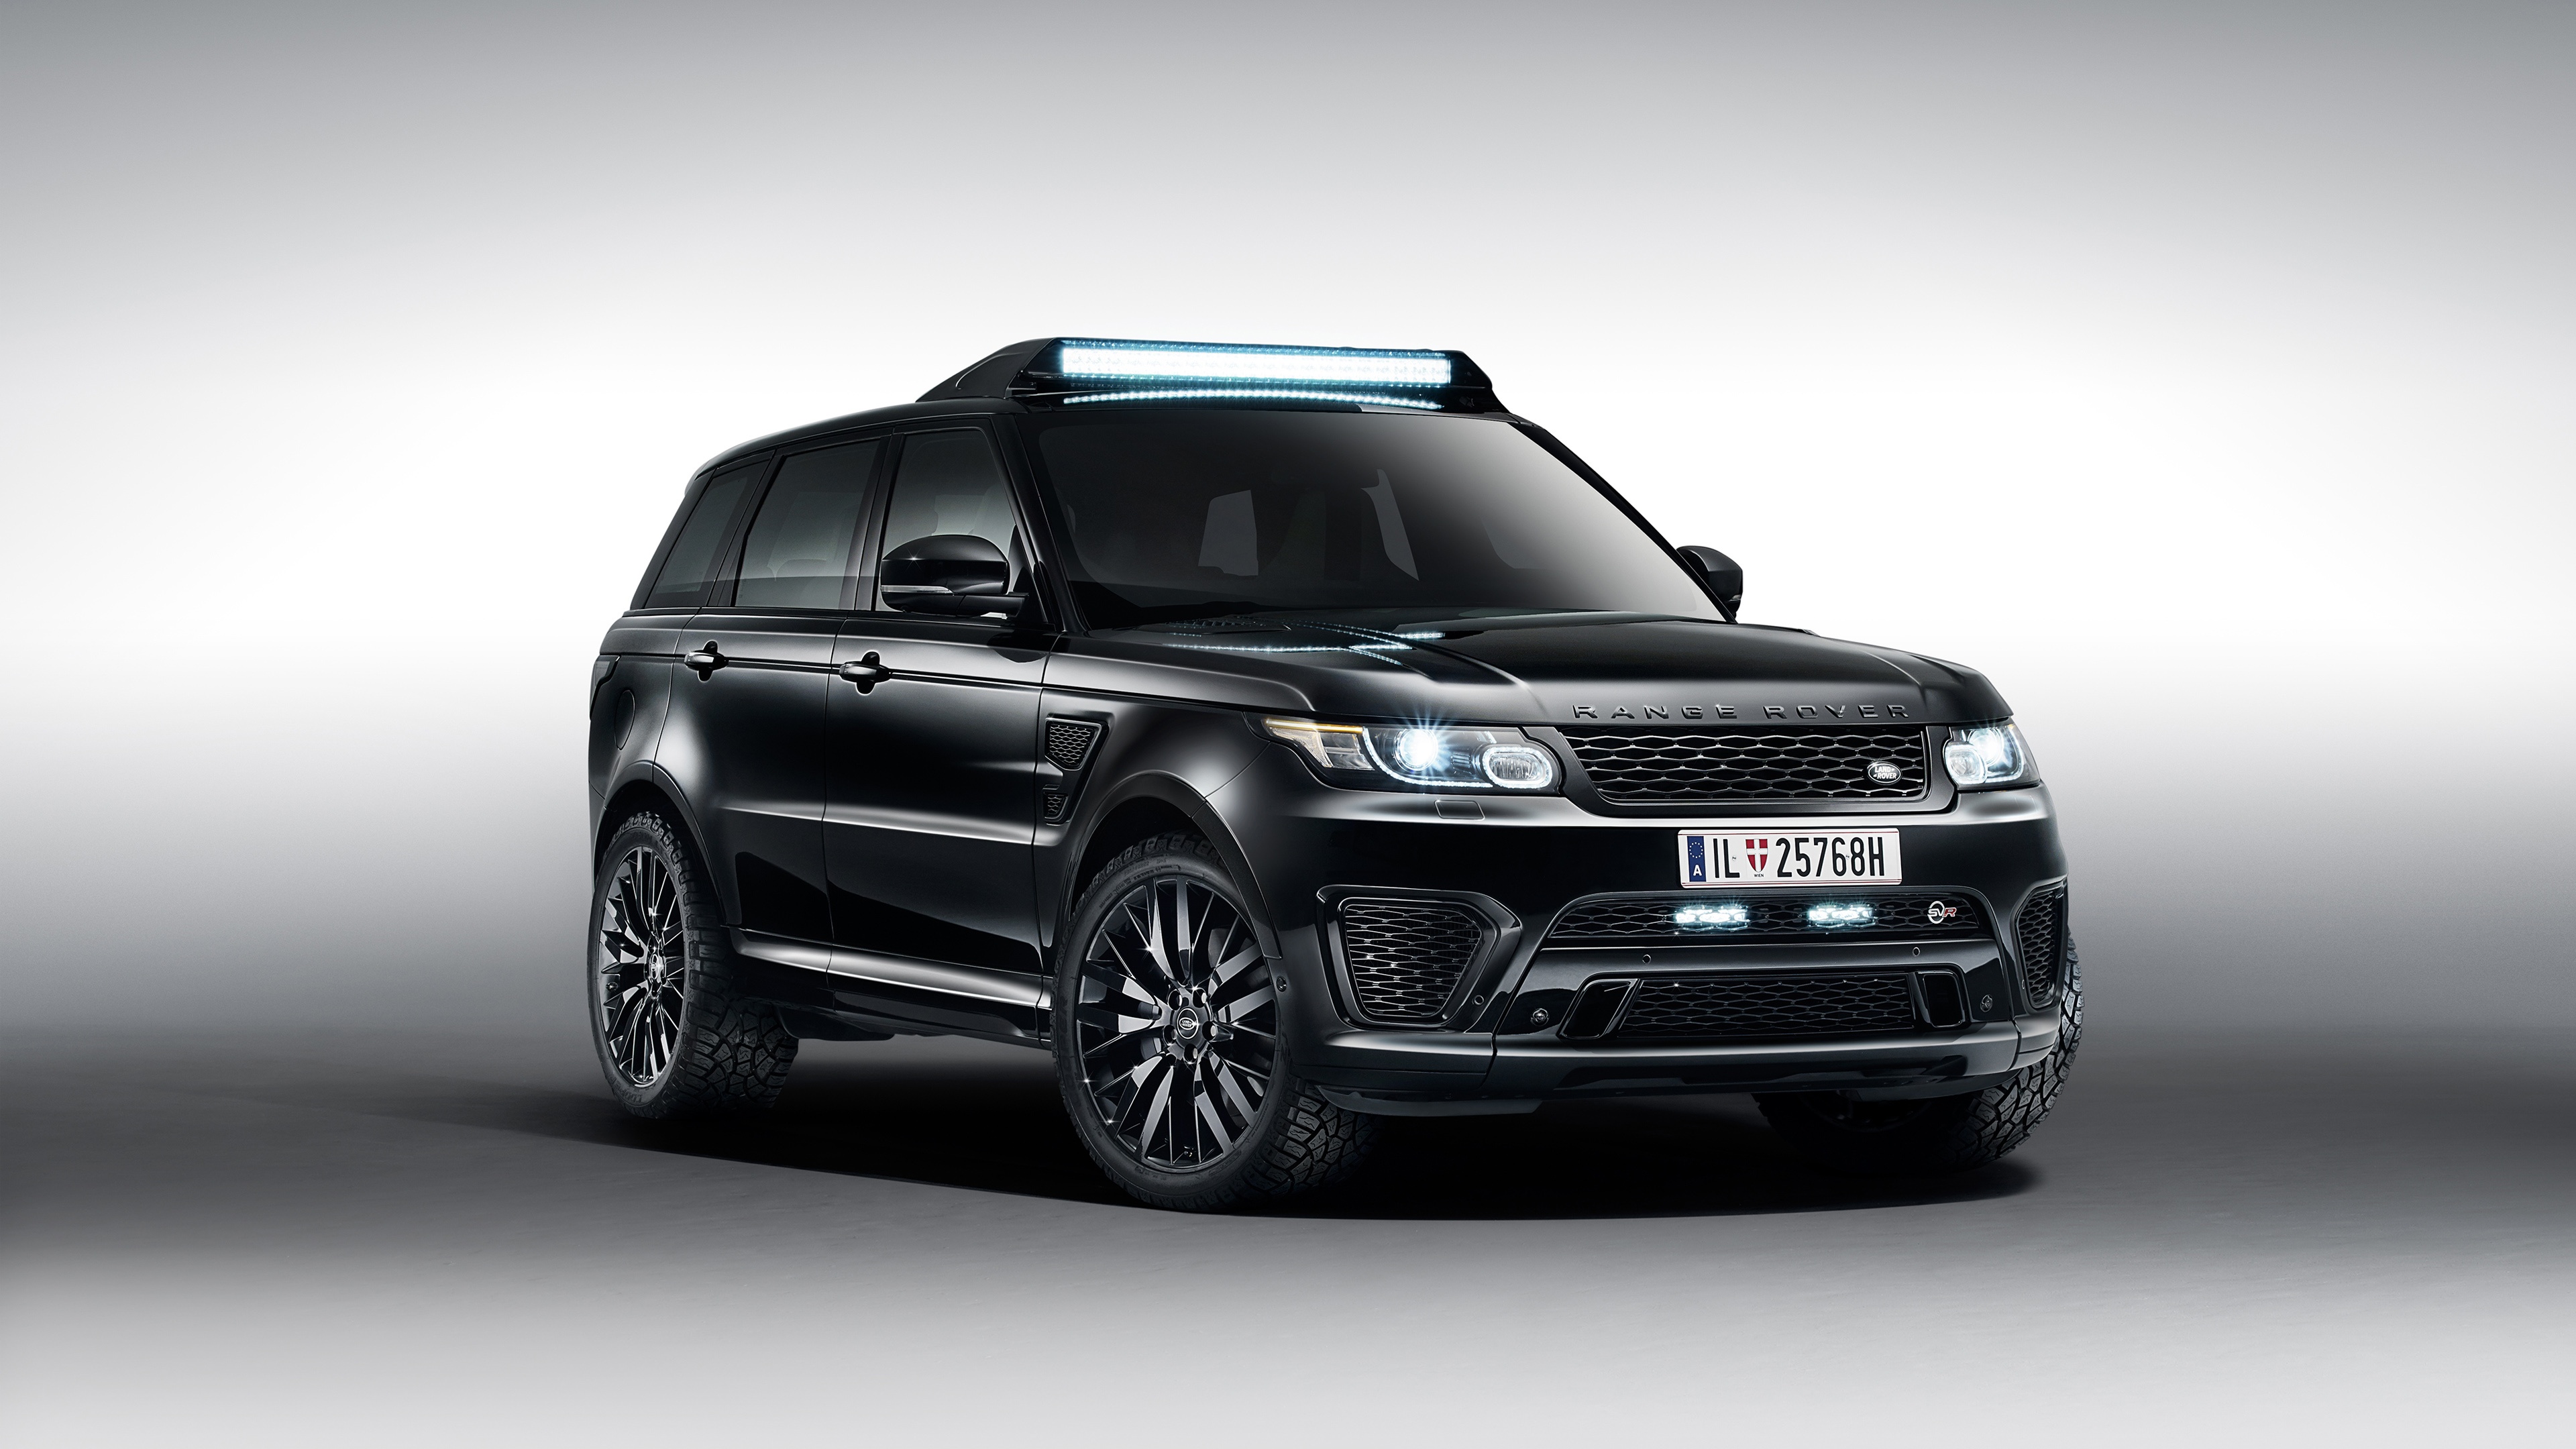 Land Rover Car Wallpapers,Pictures | Land Rover Widescreen & HD ...